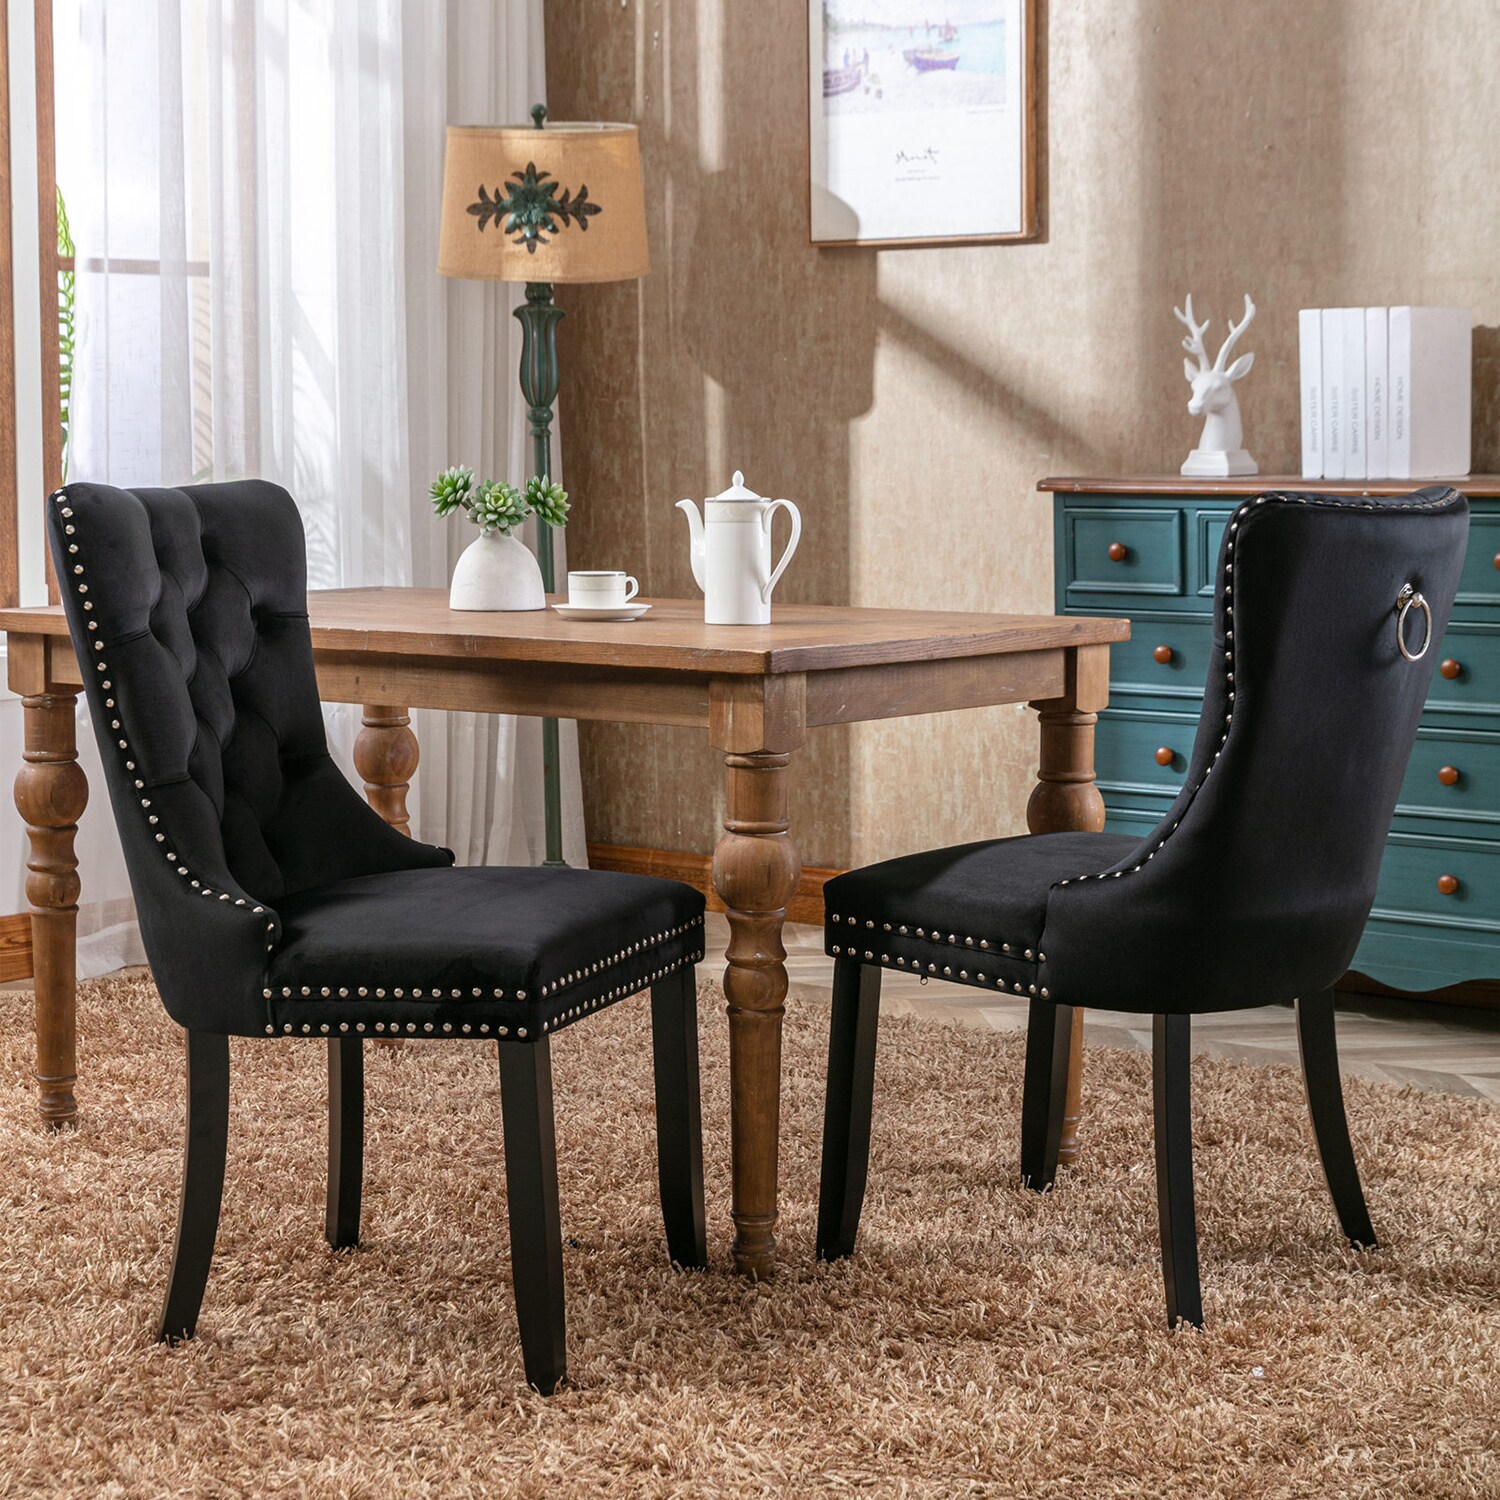 GZMR 2-Pcs Set Velvet Upholstered Dining (Wood Dining Side the Chair department Upholstered in Dining Chair Contemporary/Modern Chairs at Velvet Frame)